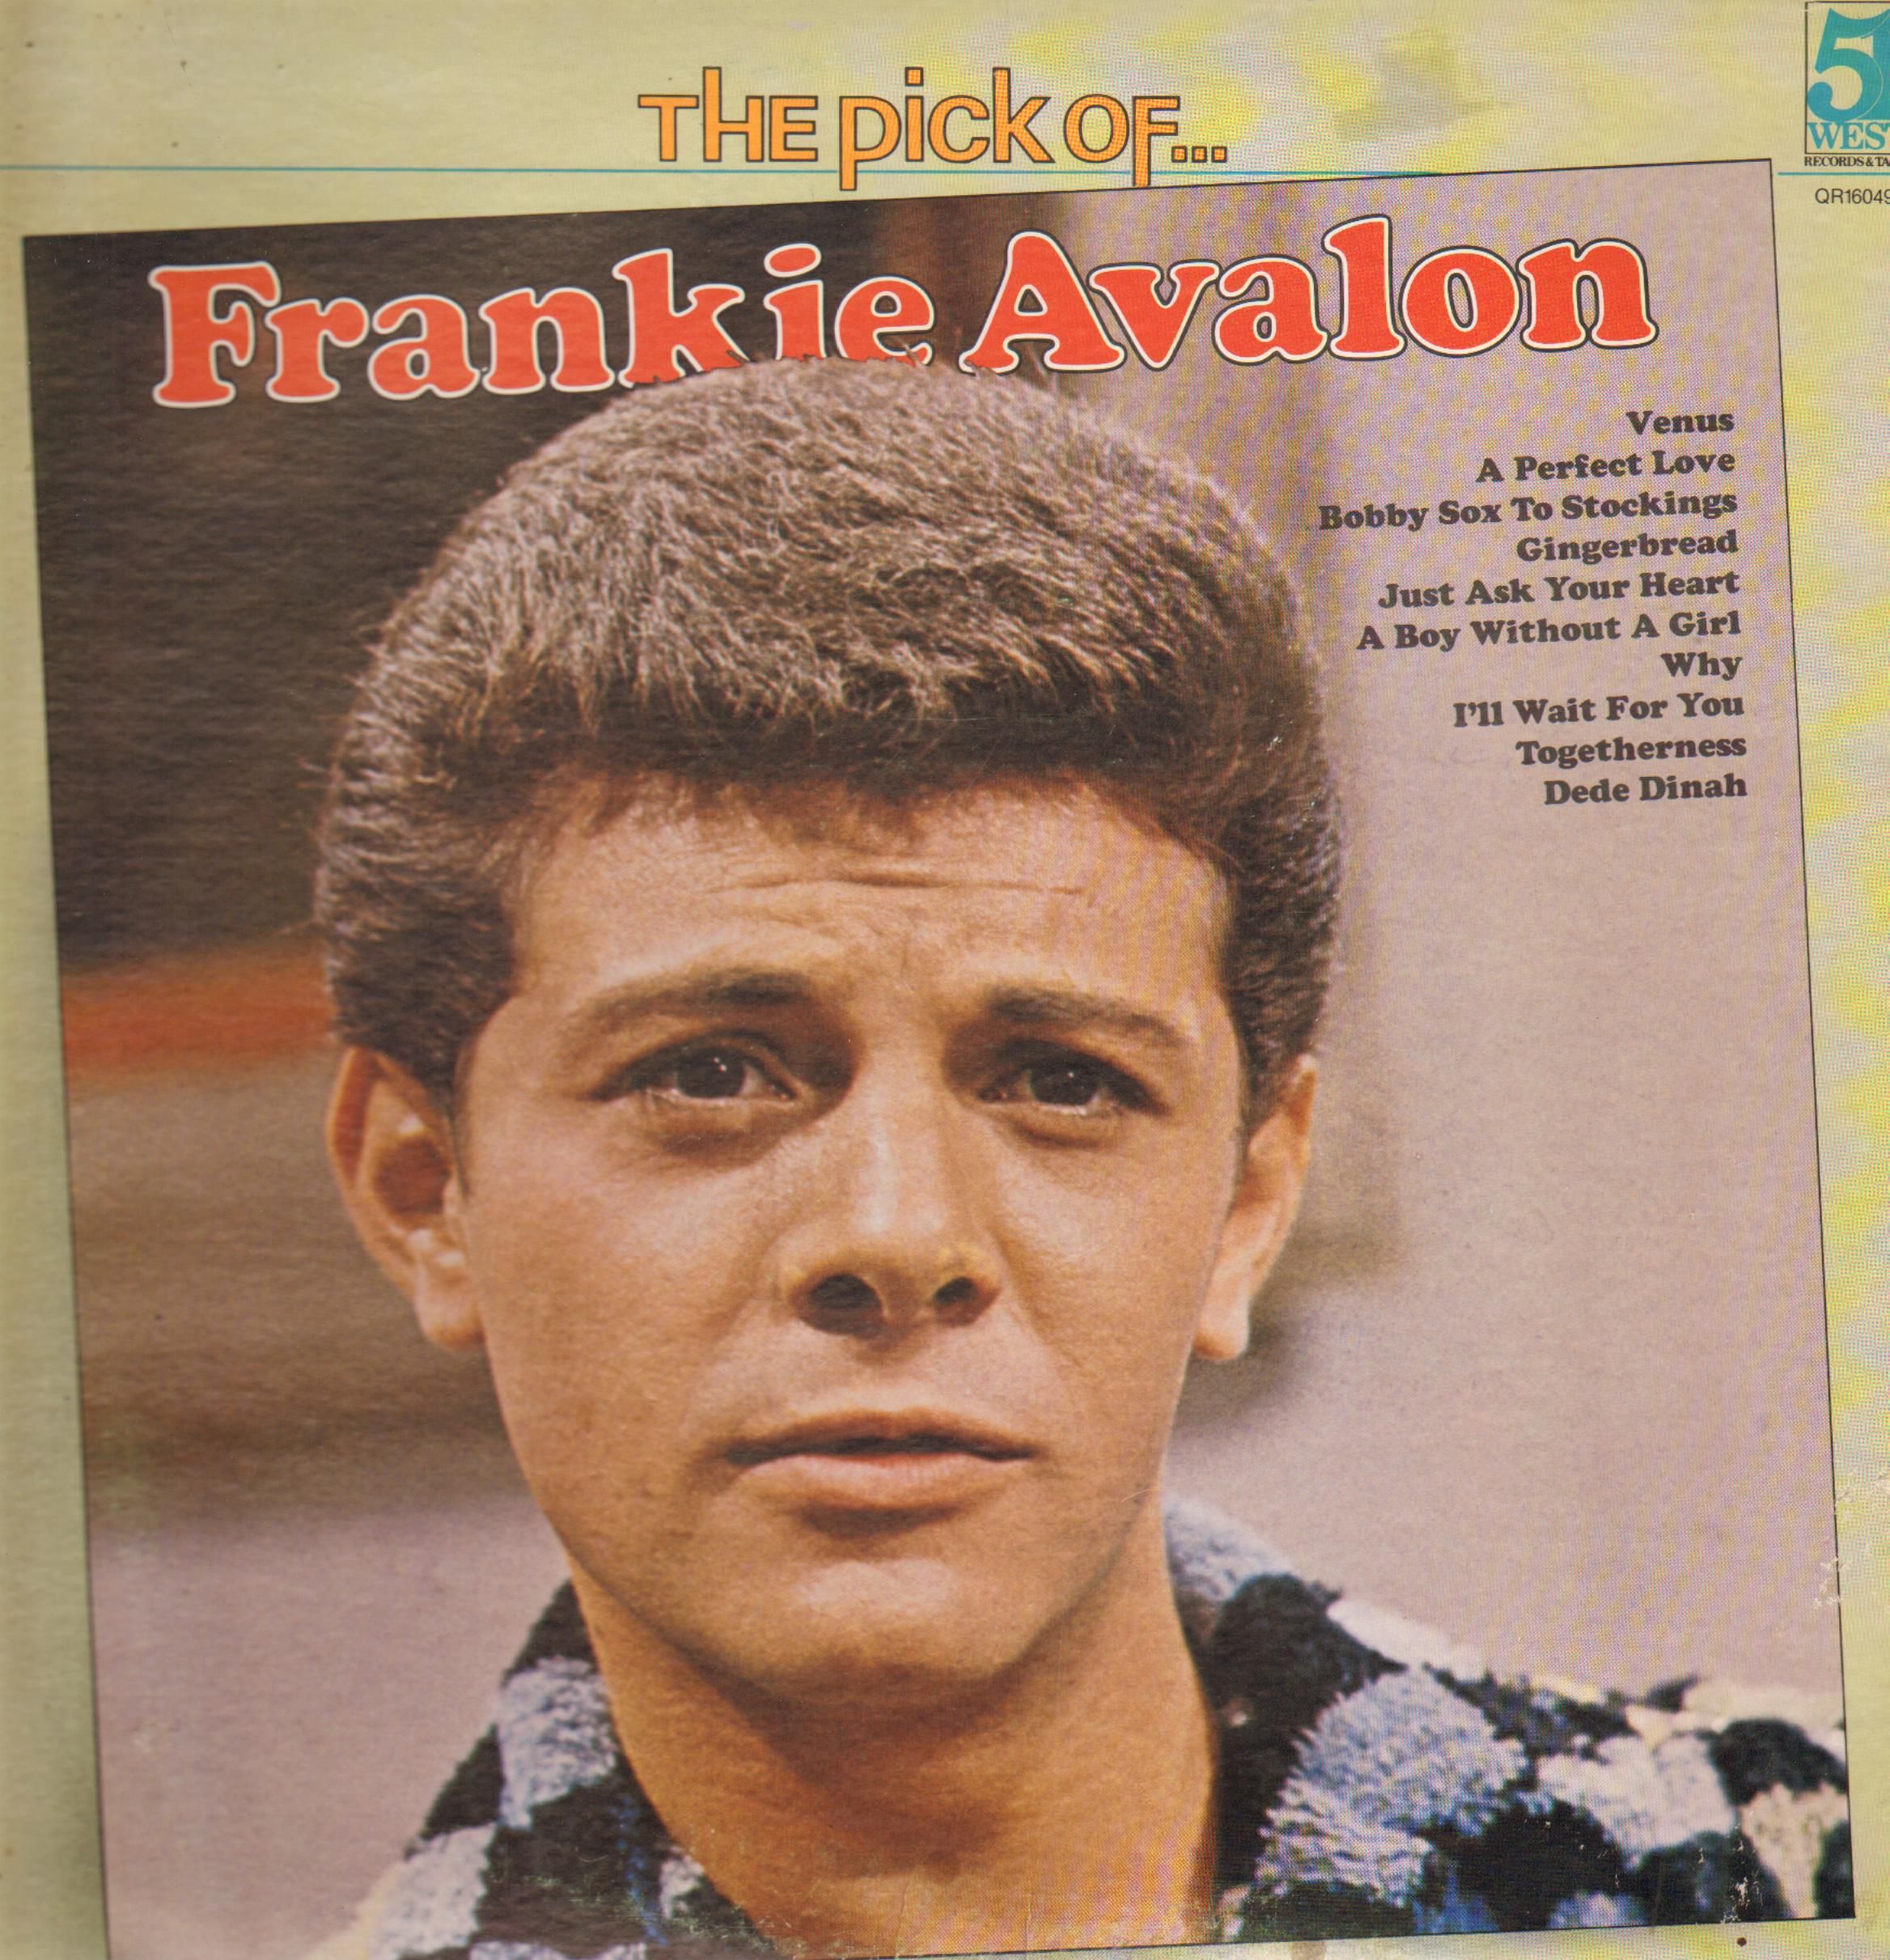 More Pictures Of Frankie Avalon. frankie avalon 2016. 